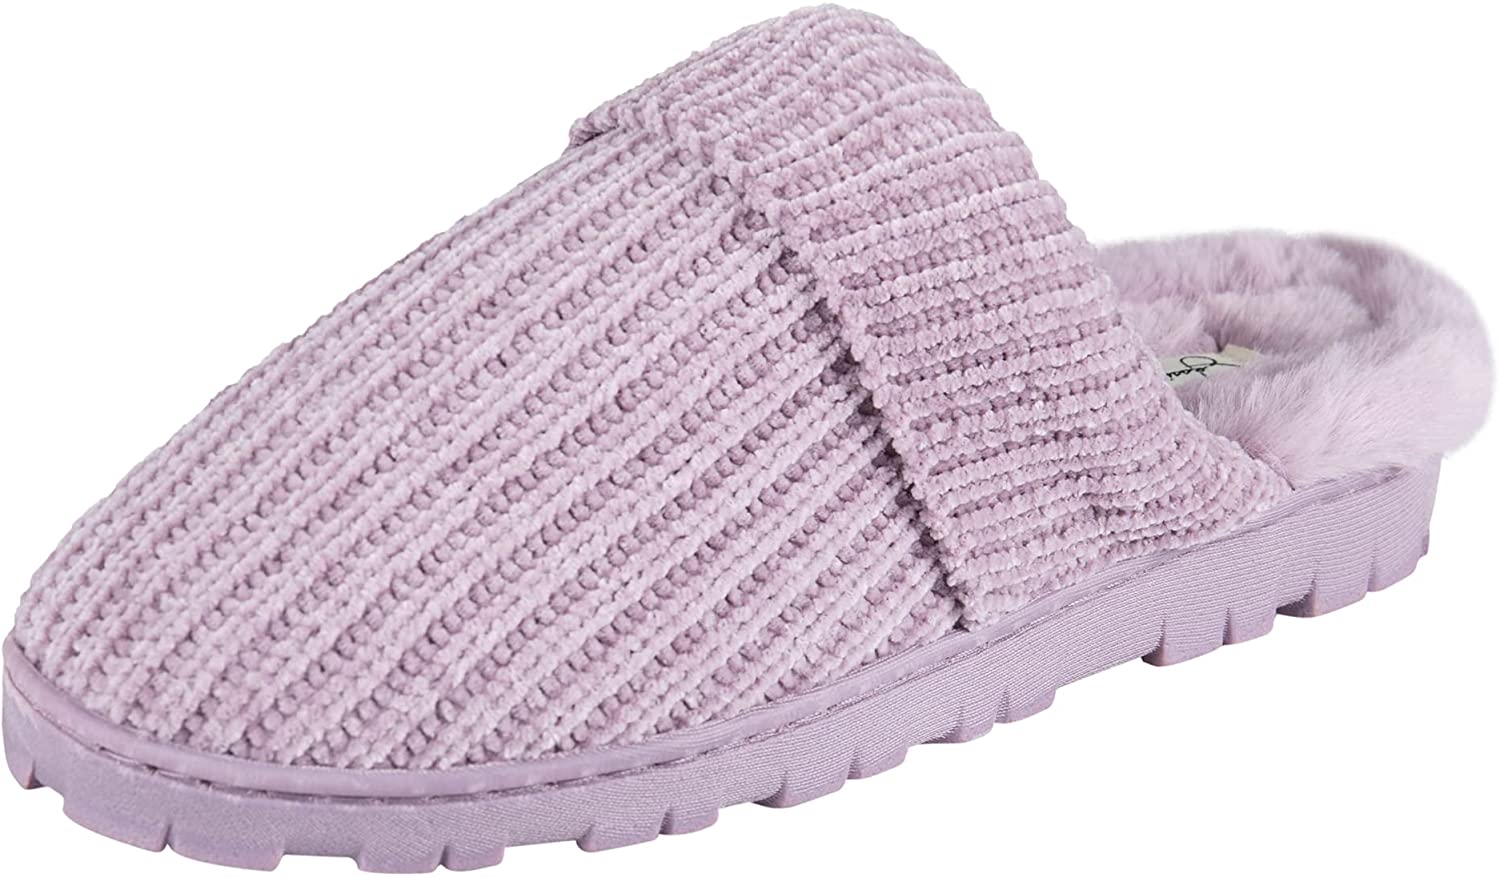 Jessica Simpson Women's Soft Knit Memory Foam Clog Slippers with Indoor/Outdoor Sole 